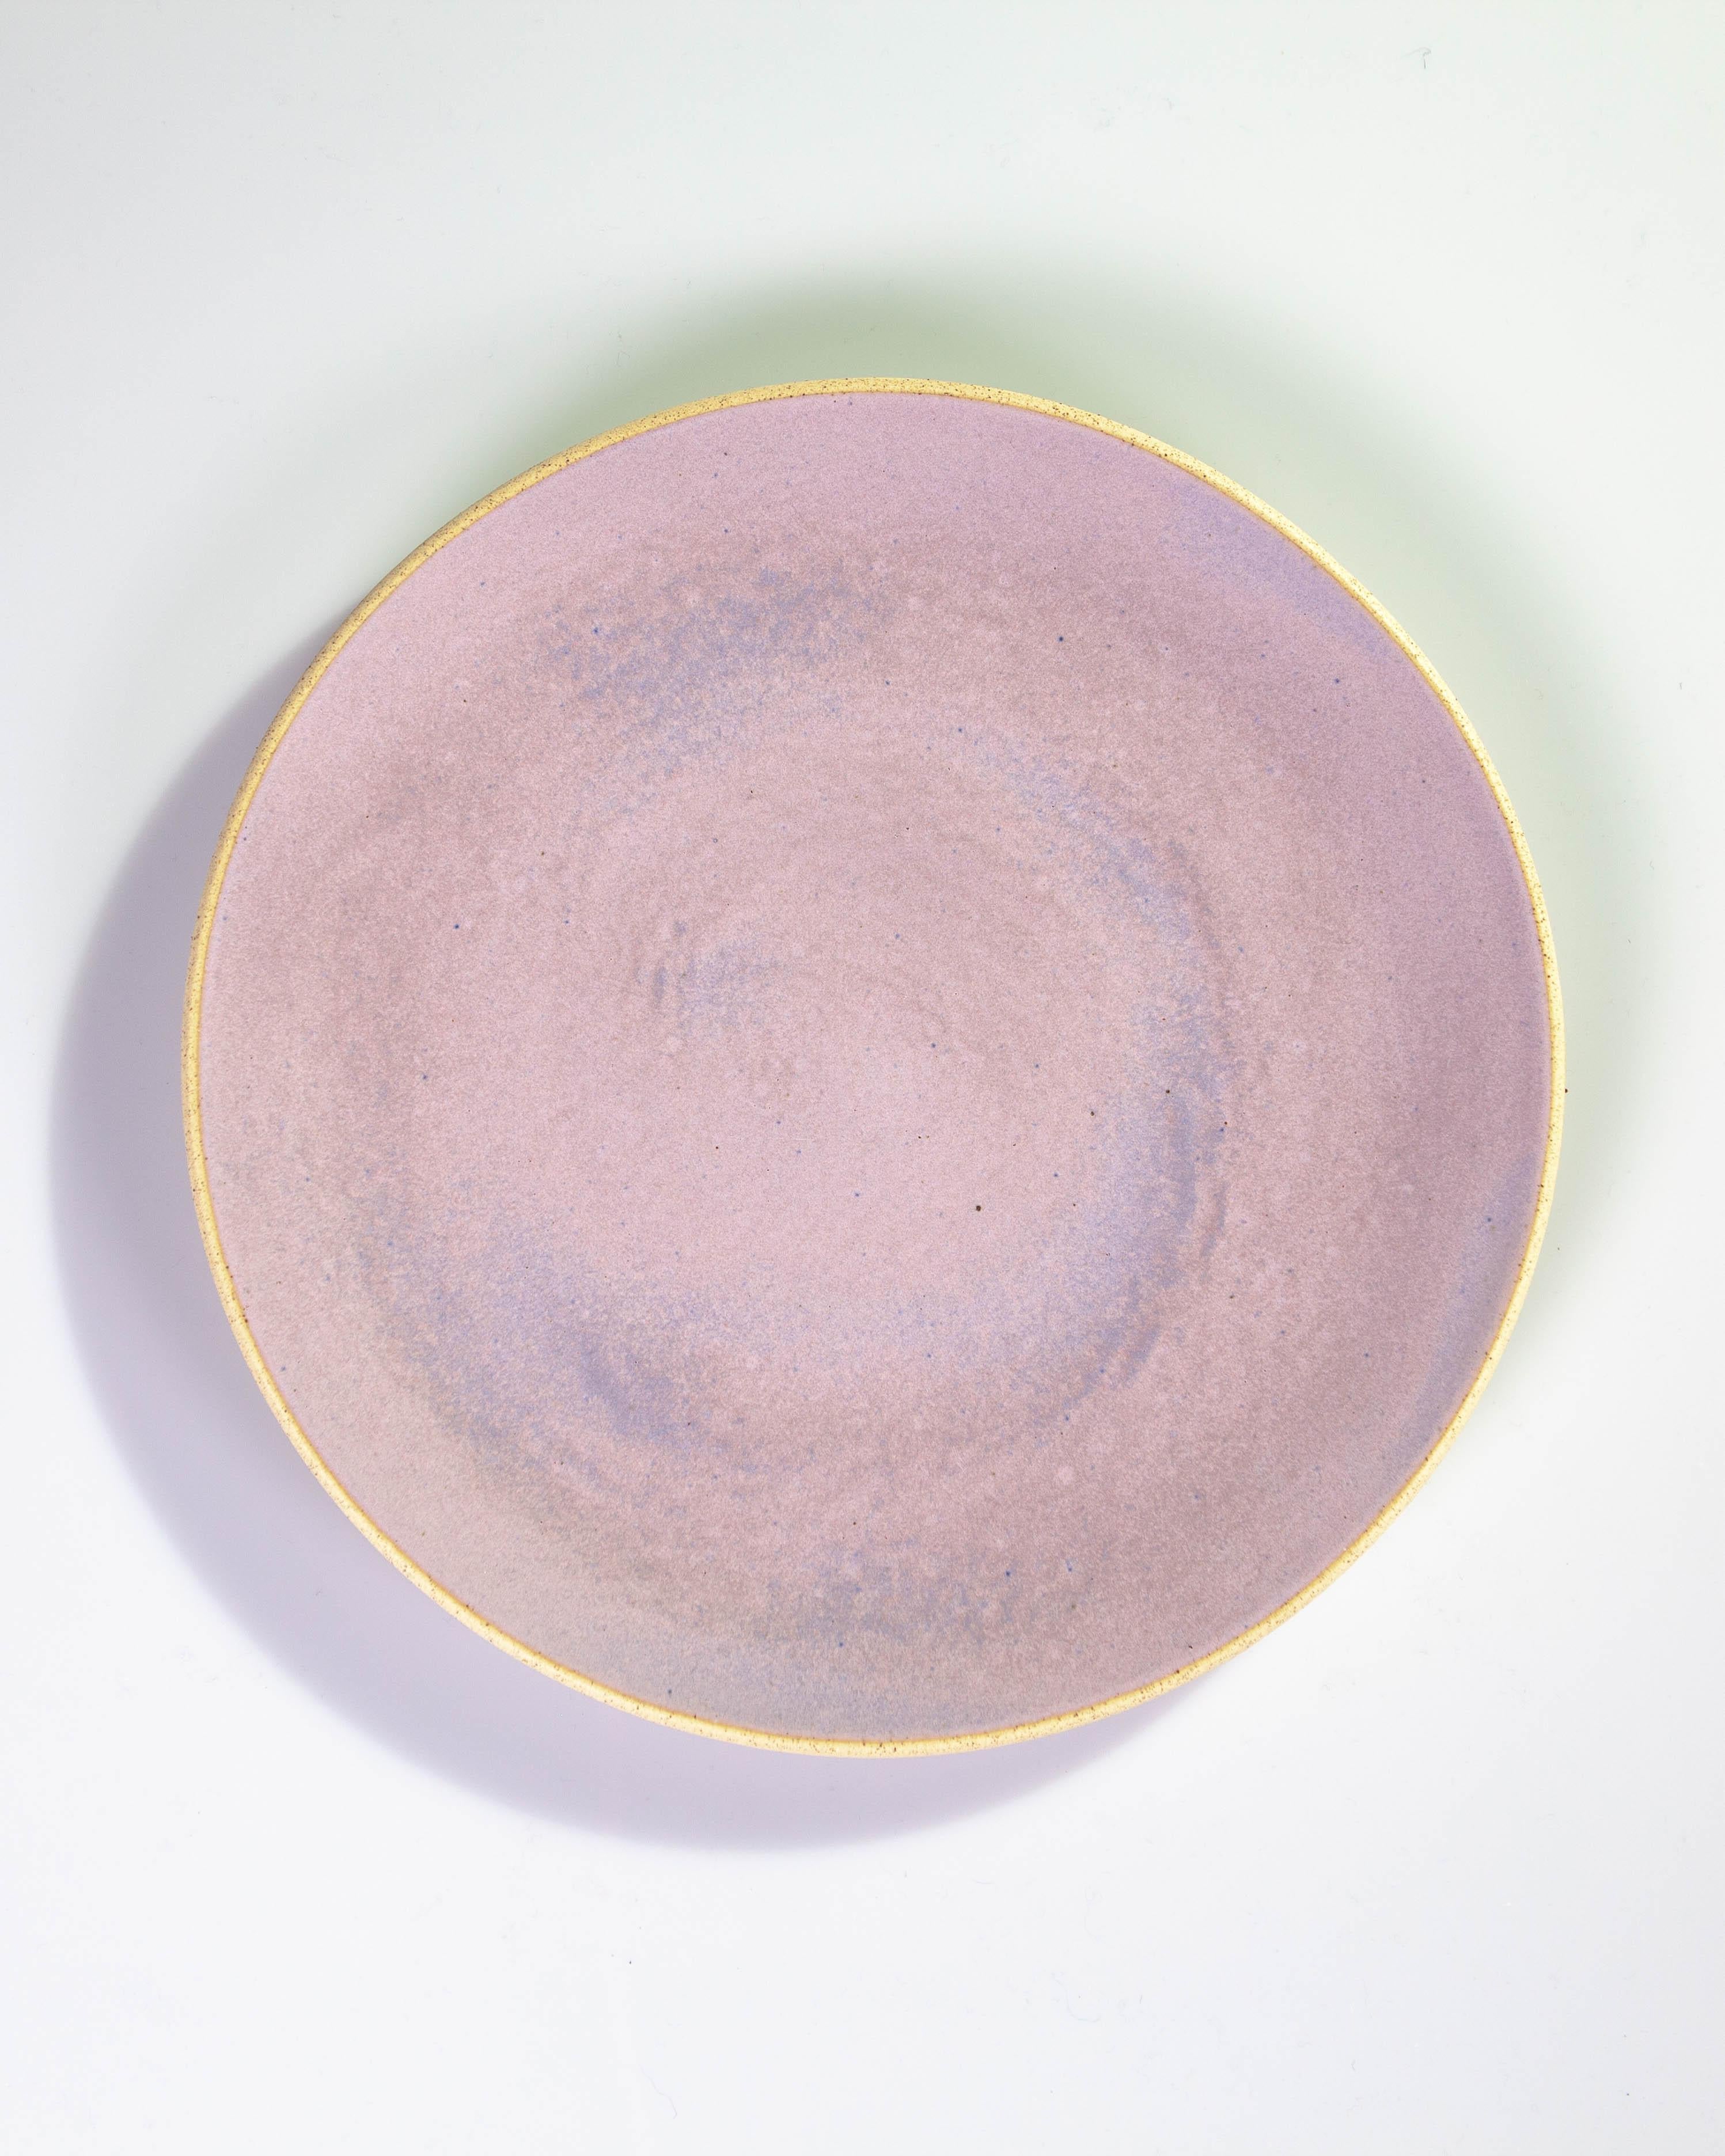 Hand-Crafted Handmade Ceramic Stoneware Bowl in Lavender, in Stock